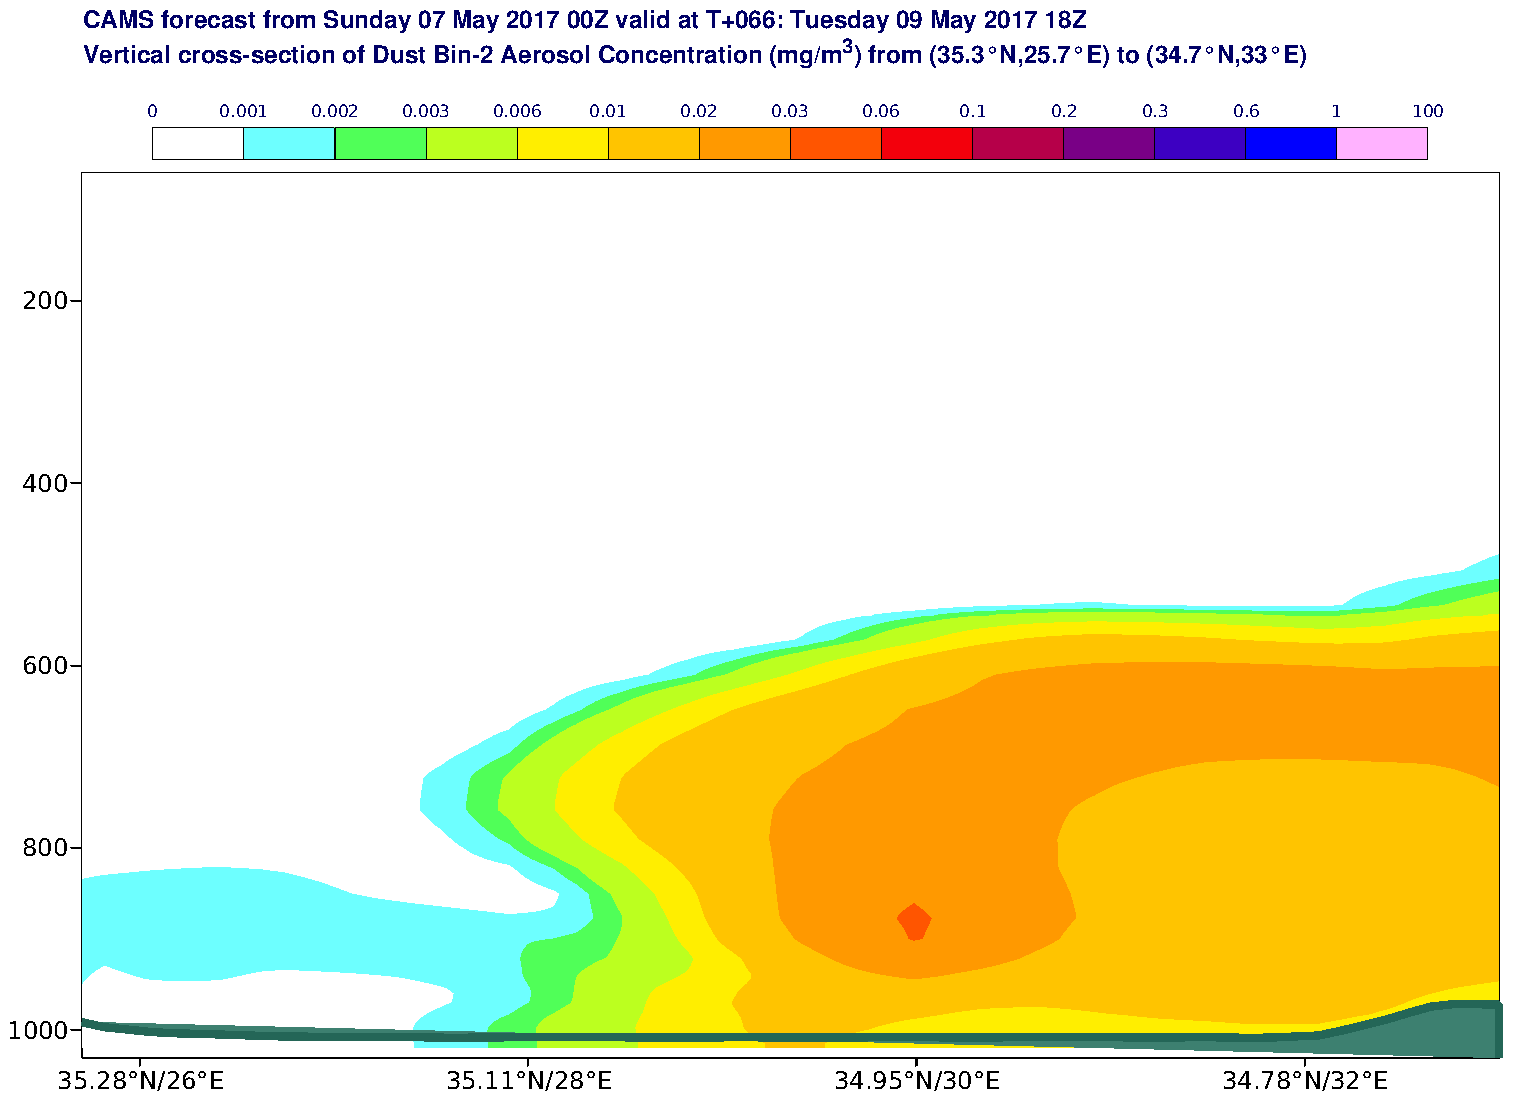 Vertical cross-section of Dust Bin-2 Aerosol Concentration (mg/m3) valid at T66 - 2017-05-09 18:00